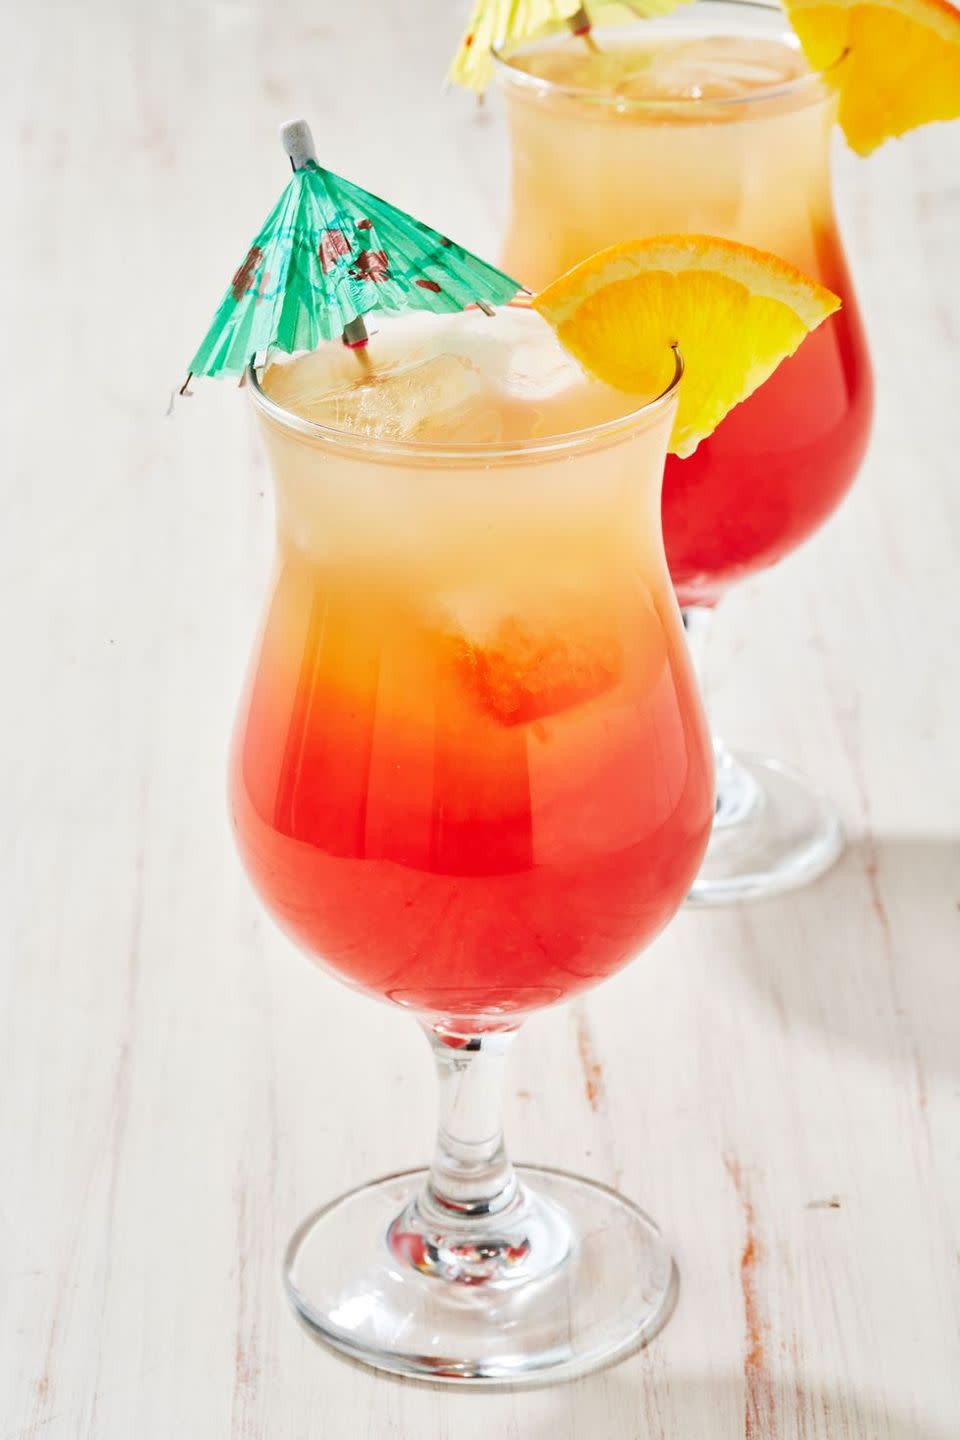 <p>Peachy, tart, and citrusy, this cocktail is the perfect drink to wind down with after a long day. It's our favorite <a href="https://www.delish.com/entertaining/g2163/summer-cocktails/" rel="nofollow noopener" target="_blank" data-ylk="slk:summer cocktail" class="link ">summer cocktail</a> that makes us feel like we're on the beach no matter where we are. <br><br>Get the <strong><a href="https://www.delish.com/cooking/recipe-ideas/a30275456/sex-on-the-beach-cocktail-recipe/" rel="nofollow noopener" target="_blank" data-ylk="slk:Sex On The Beach recipe" class="link ">Sex On The Beach recipe</a></strong>.</p>